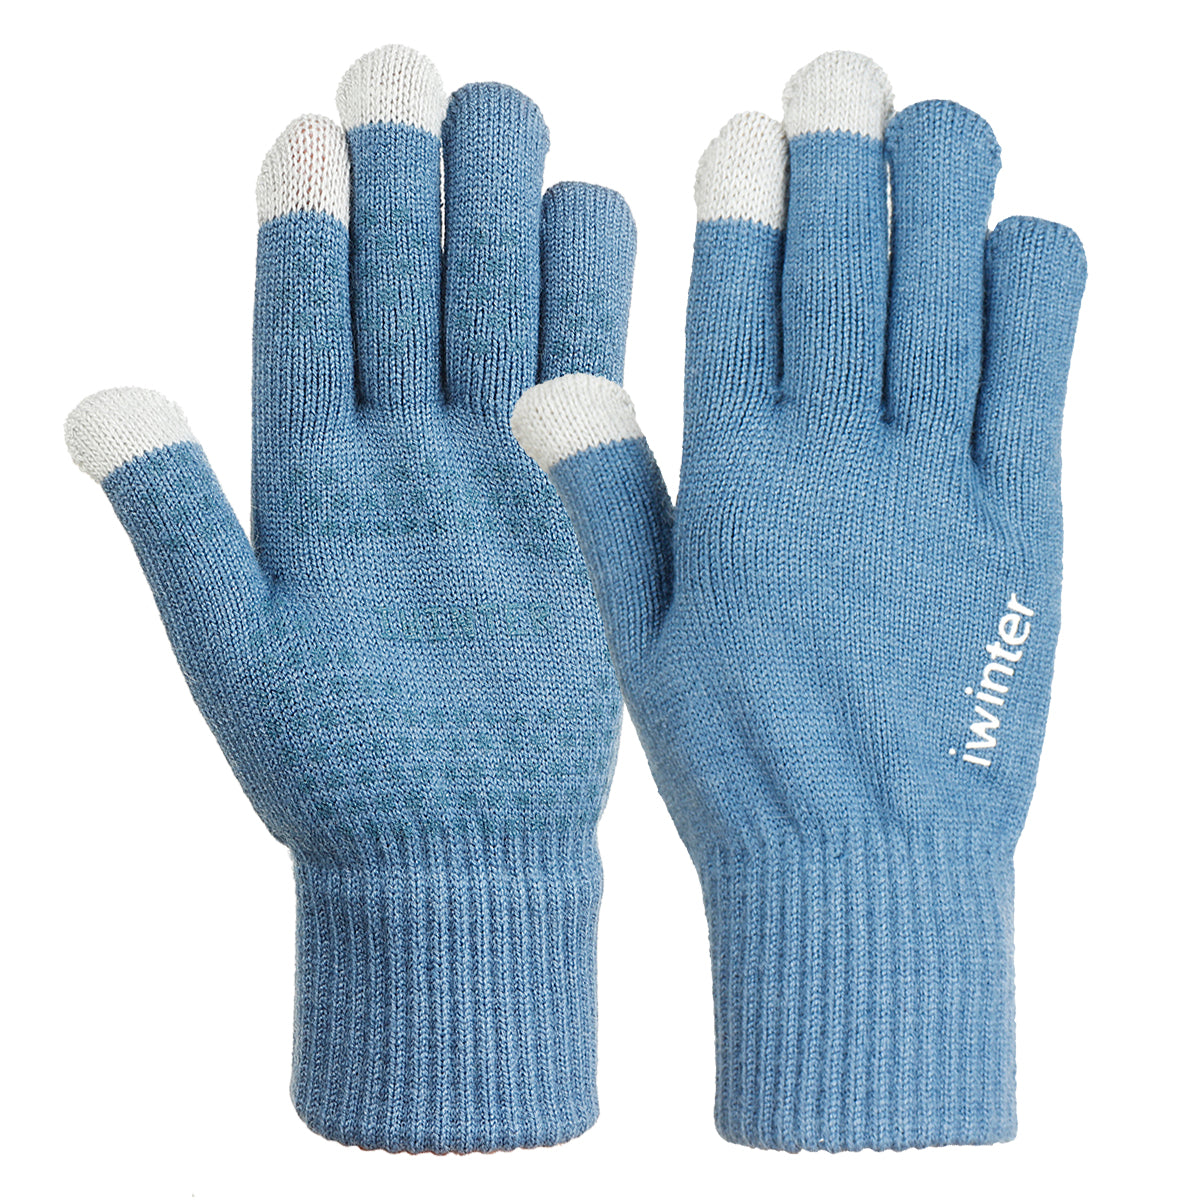 Light Slate Gray Knitted Touch Screen Outdoor Gloves Motorcycle Winter Warm Windproof Fleece Lined Thermal Non-slip